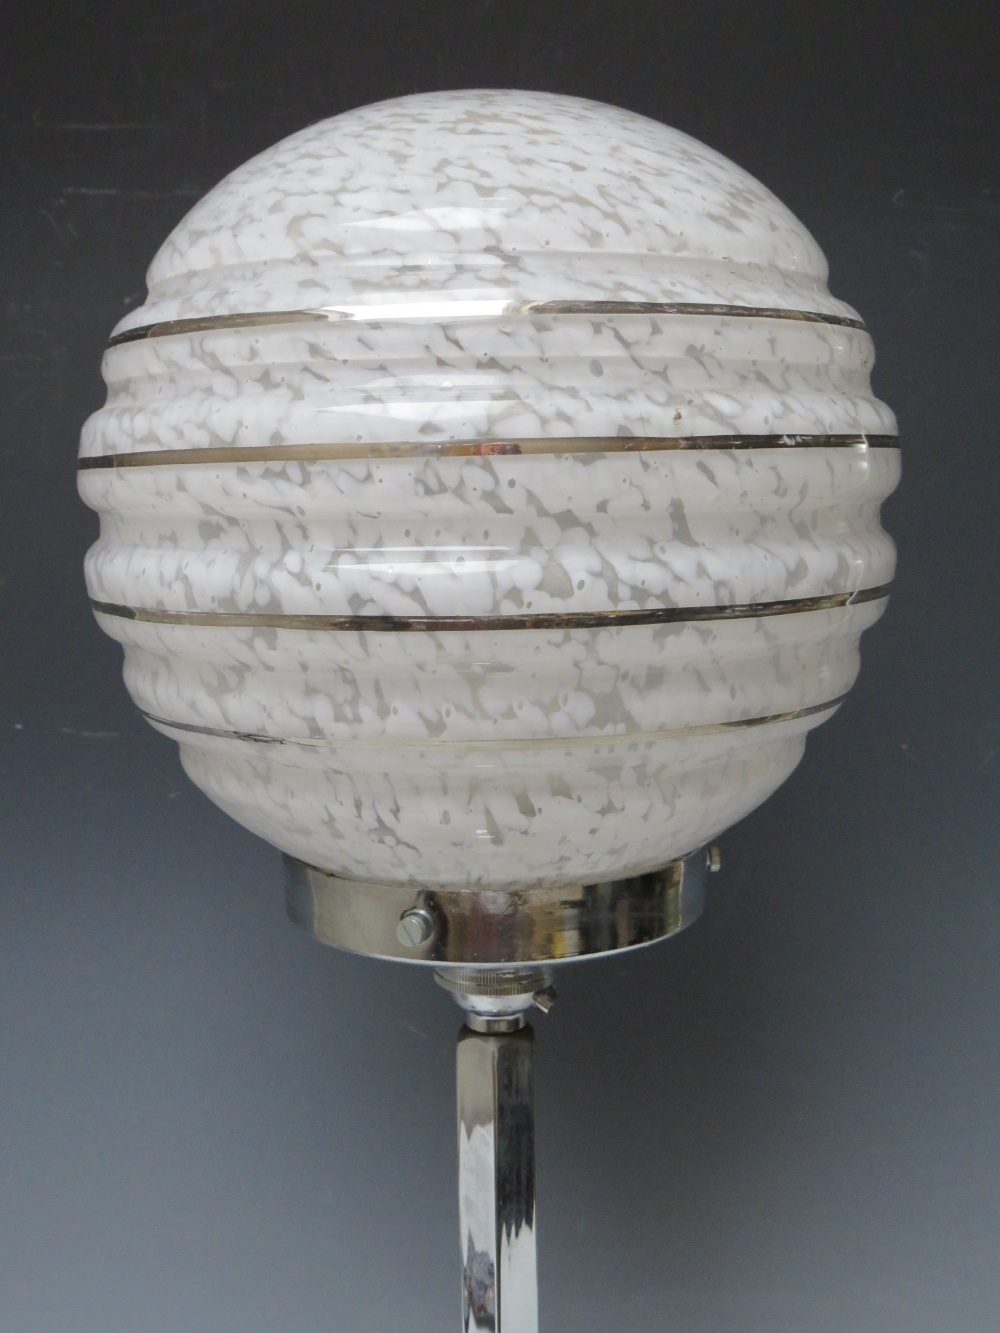 A CHROME ART DECO TABLE LAMP WITH PERIOD SHADE, overall H 53.5 cm - Image 3 of 6